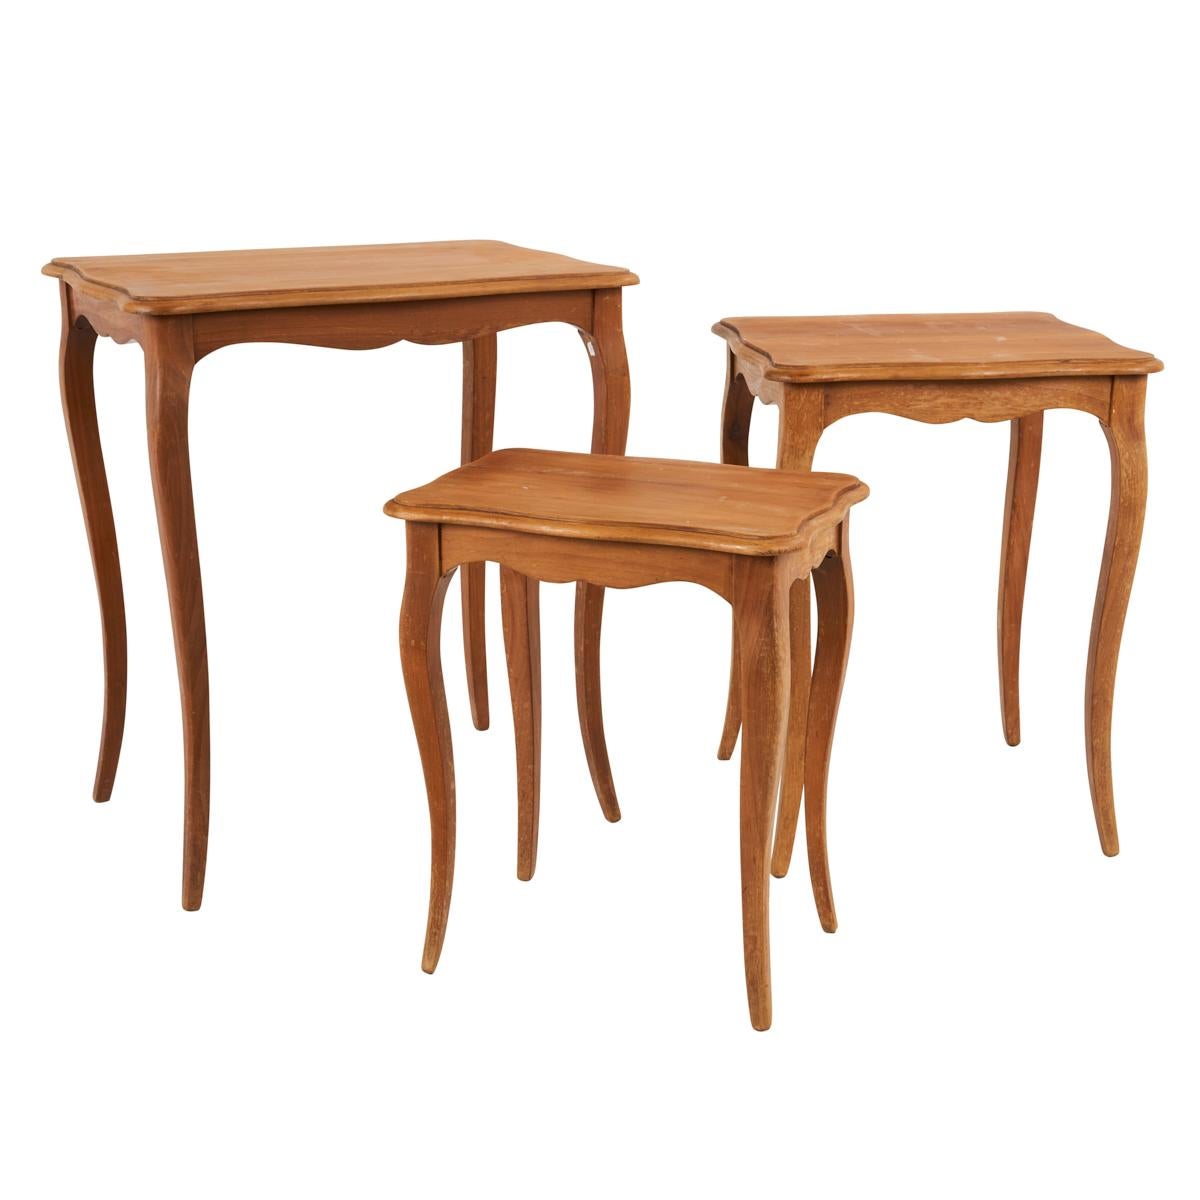 Set of 3 Wood Nesting Tables with Cabriole Leg, France In Good Condition For Sale In New York, NY